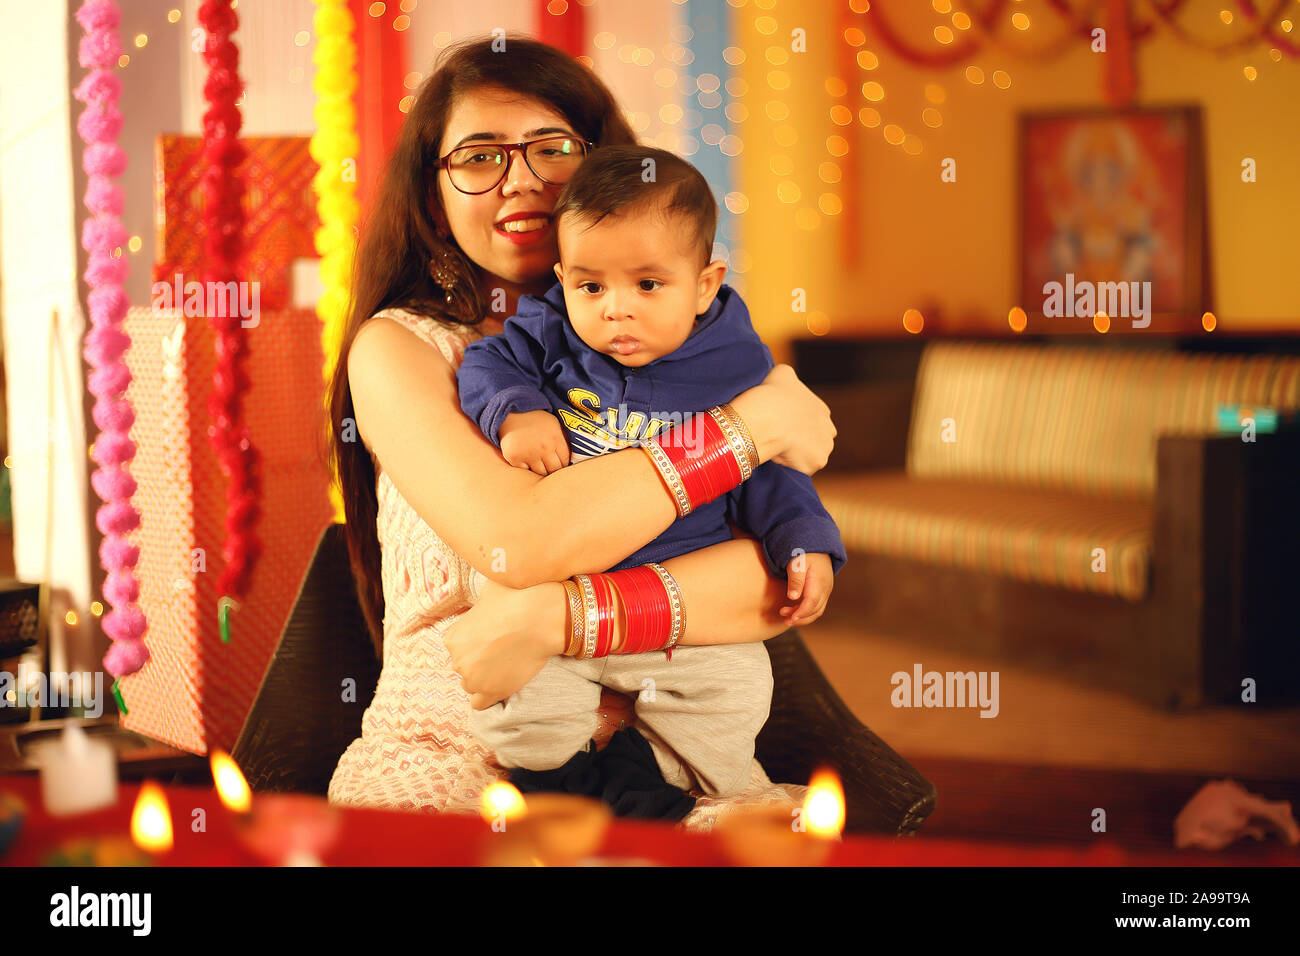 Portrait of a beautiful young Indian woman in traditional dress holding an acute baby boy within the decorative background on the occasion of Diwali. Stock Photo